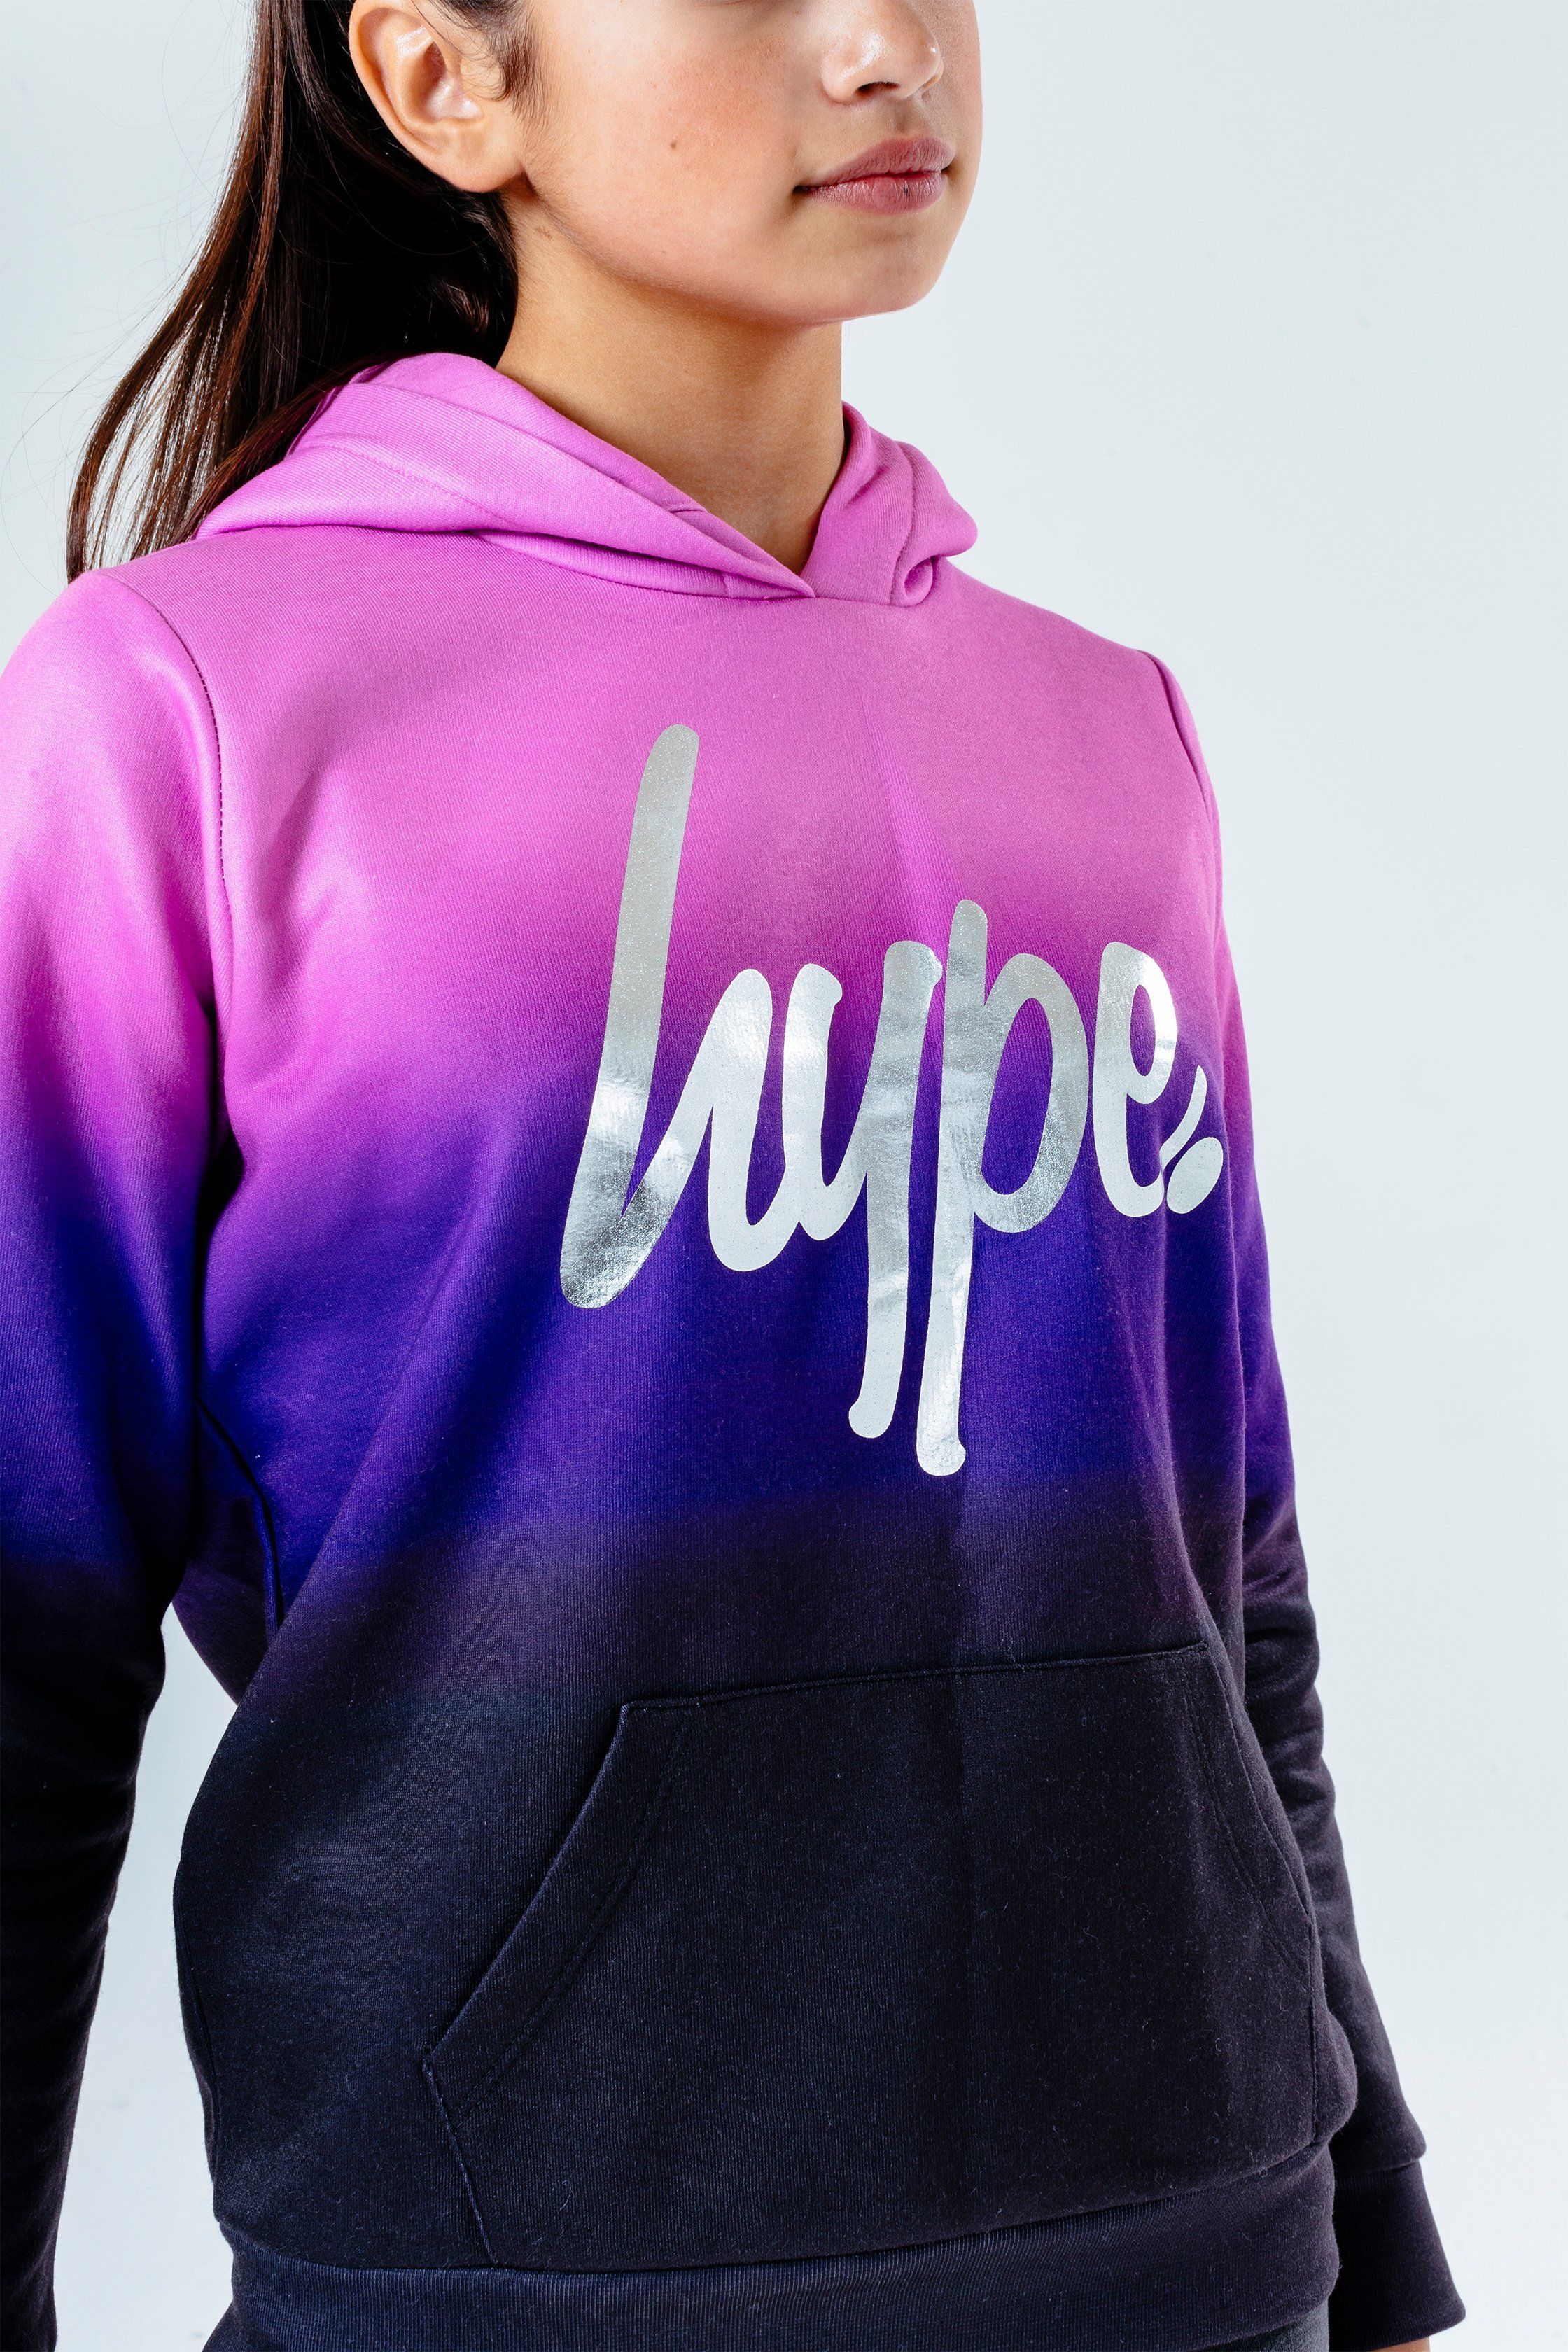 Update your 'drobe with the HYPE. Sweetshop Fade Kids Pullover Hoodie. Designed in a black and light purple, purple and black colour palette in a 60% polyester and 40% cotton fabric base for supreme comfort in our standard unisex kids jumper shape. With a fixed hood, kangaroo pocket, long sleeves and fitted hem and cuffs. Finished with the iconic HYPE. script logo in a silver foil transfer. Wear with cycle shorts for an on-trend look. Machine wash at 30 degrees.